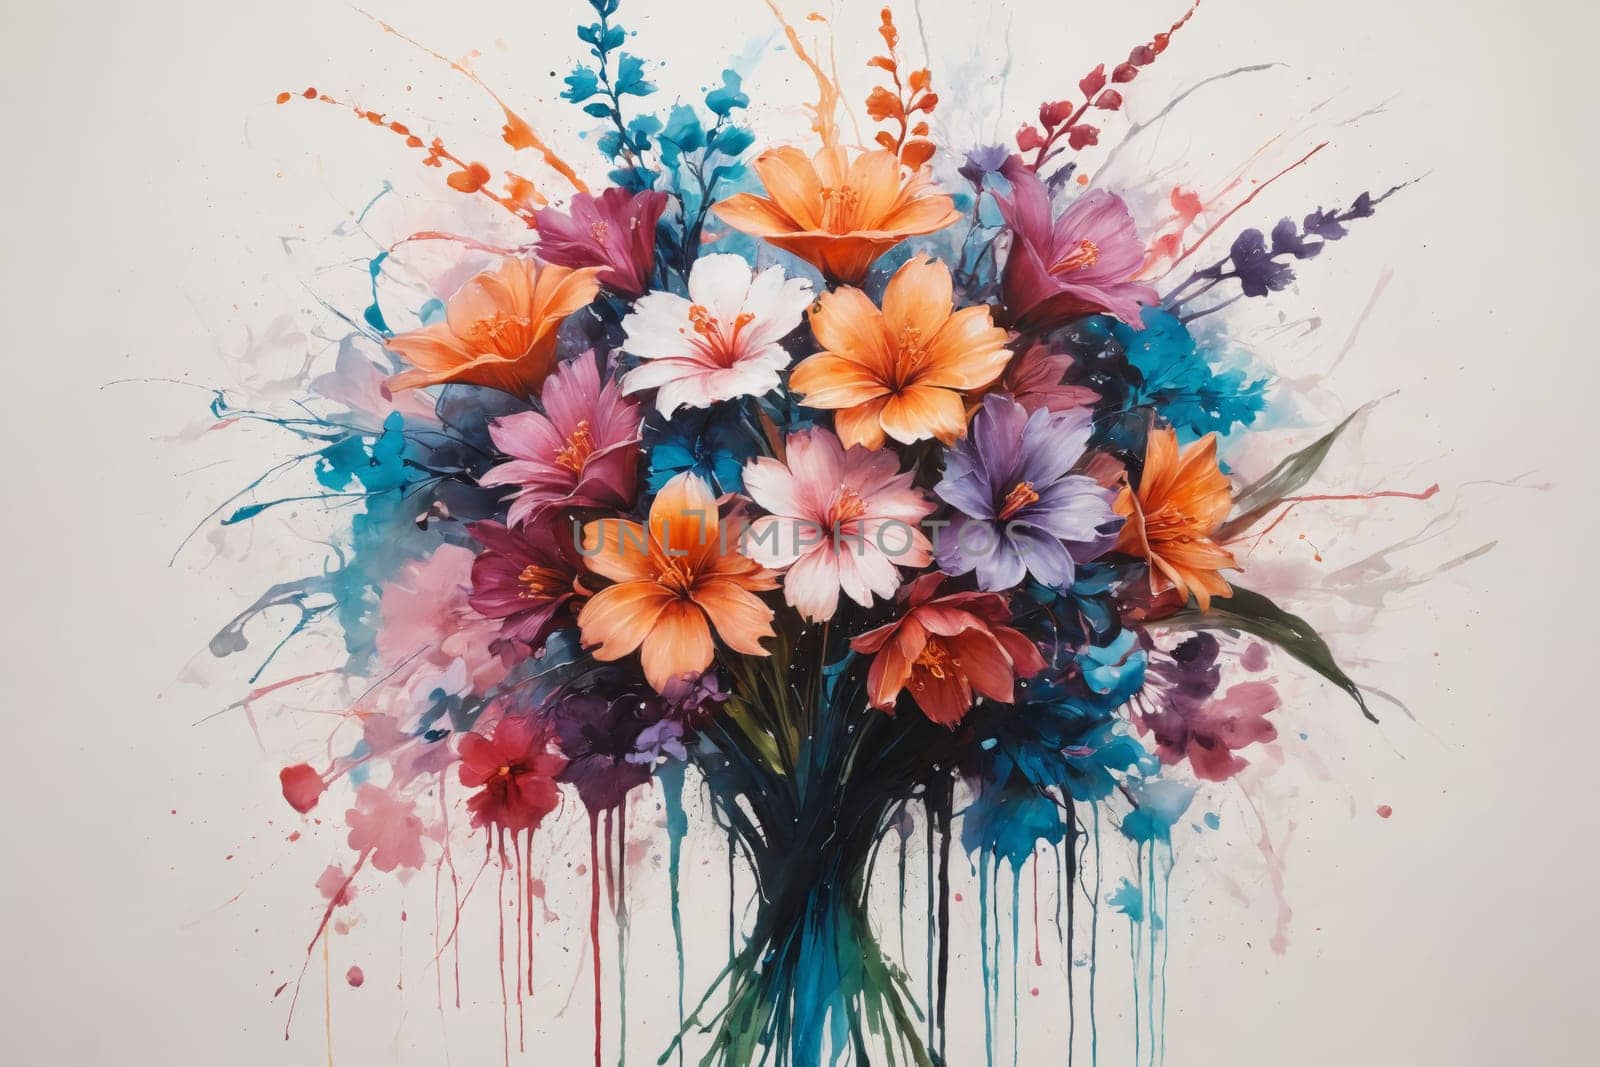 Experience the joy of a bright, abstract floral painting, where every color seems to burst forth in celebration. Perfect for art-themed content, floral appreciation posts, or to bring a splash of color to any project.